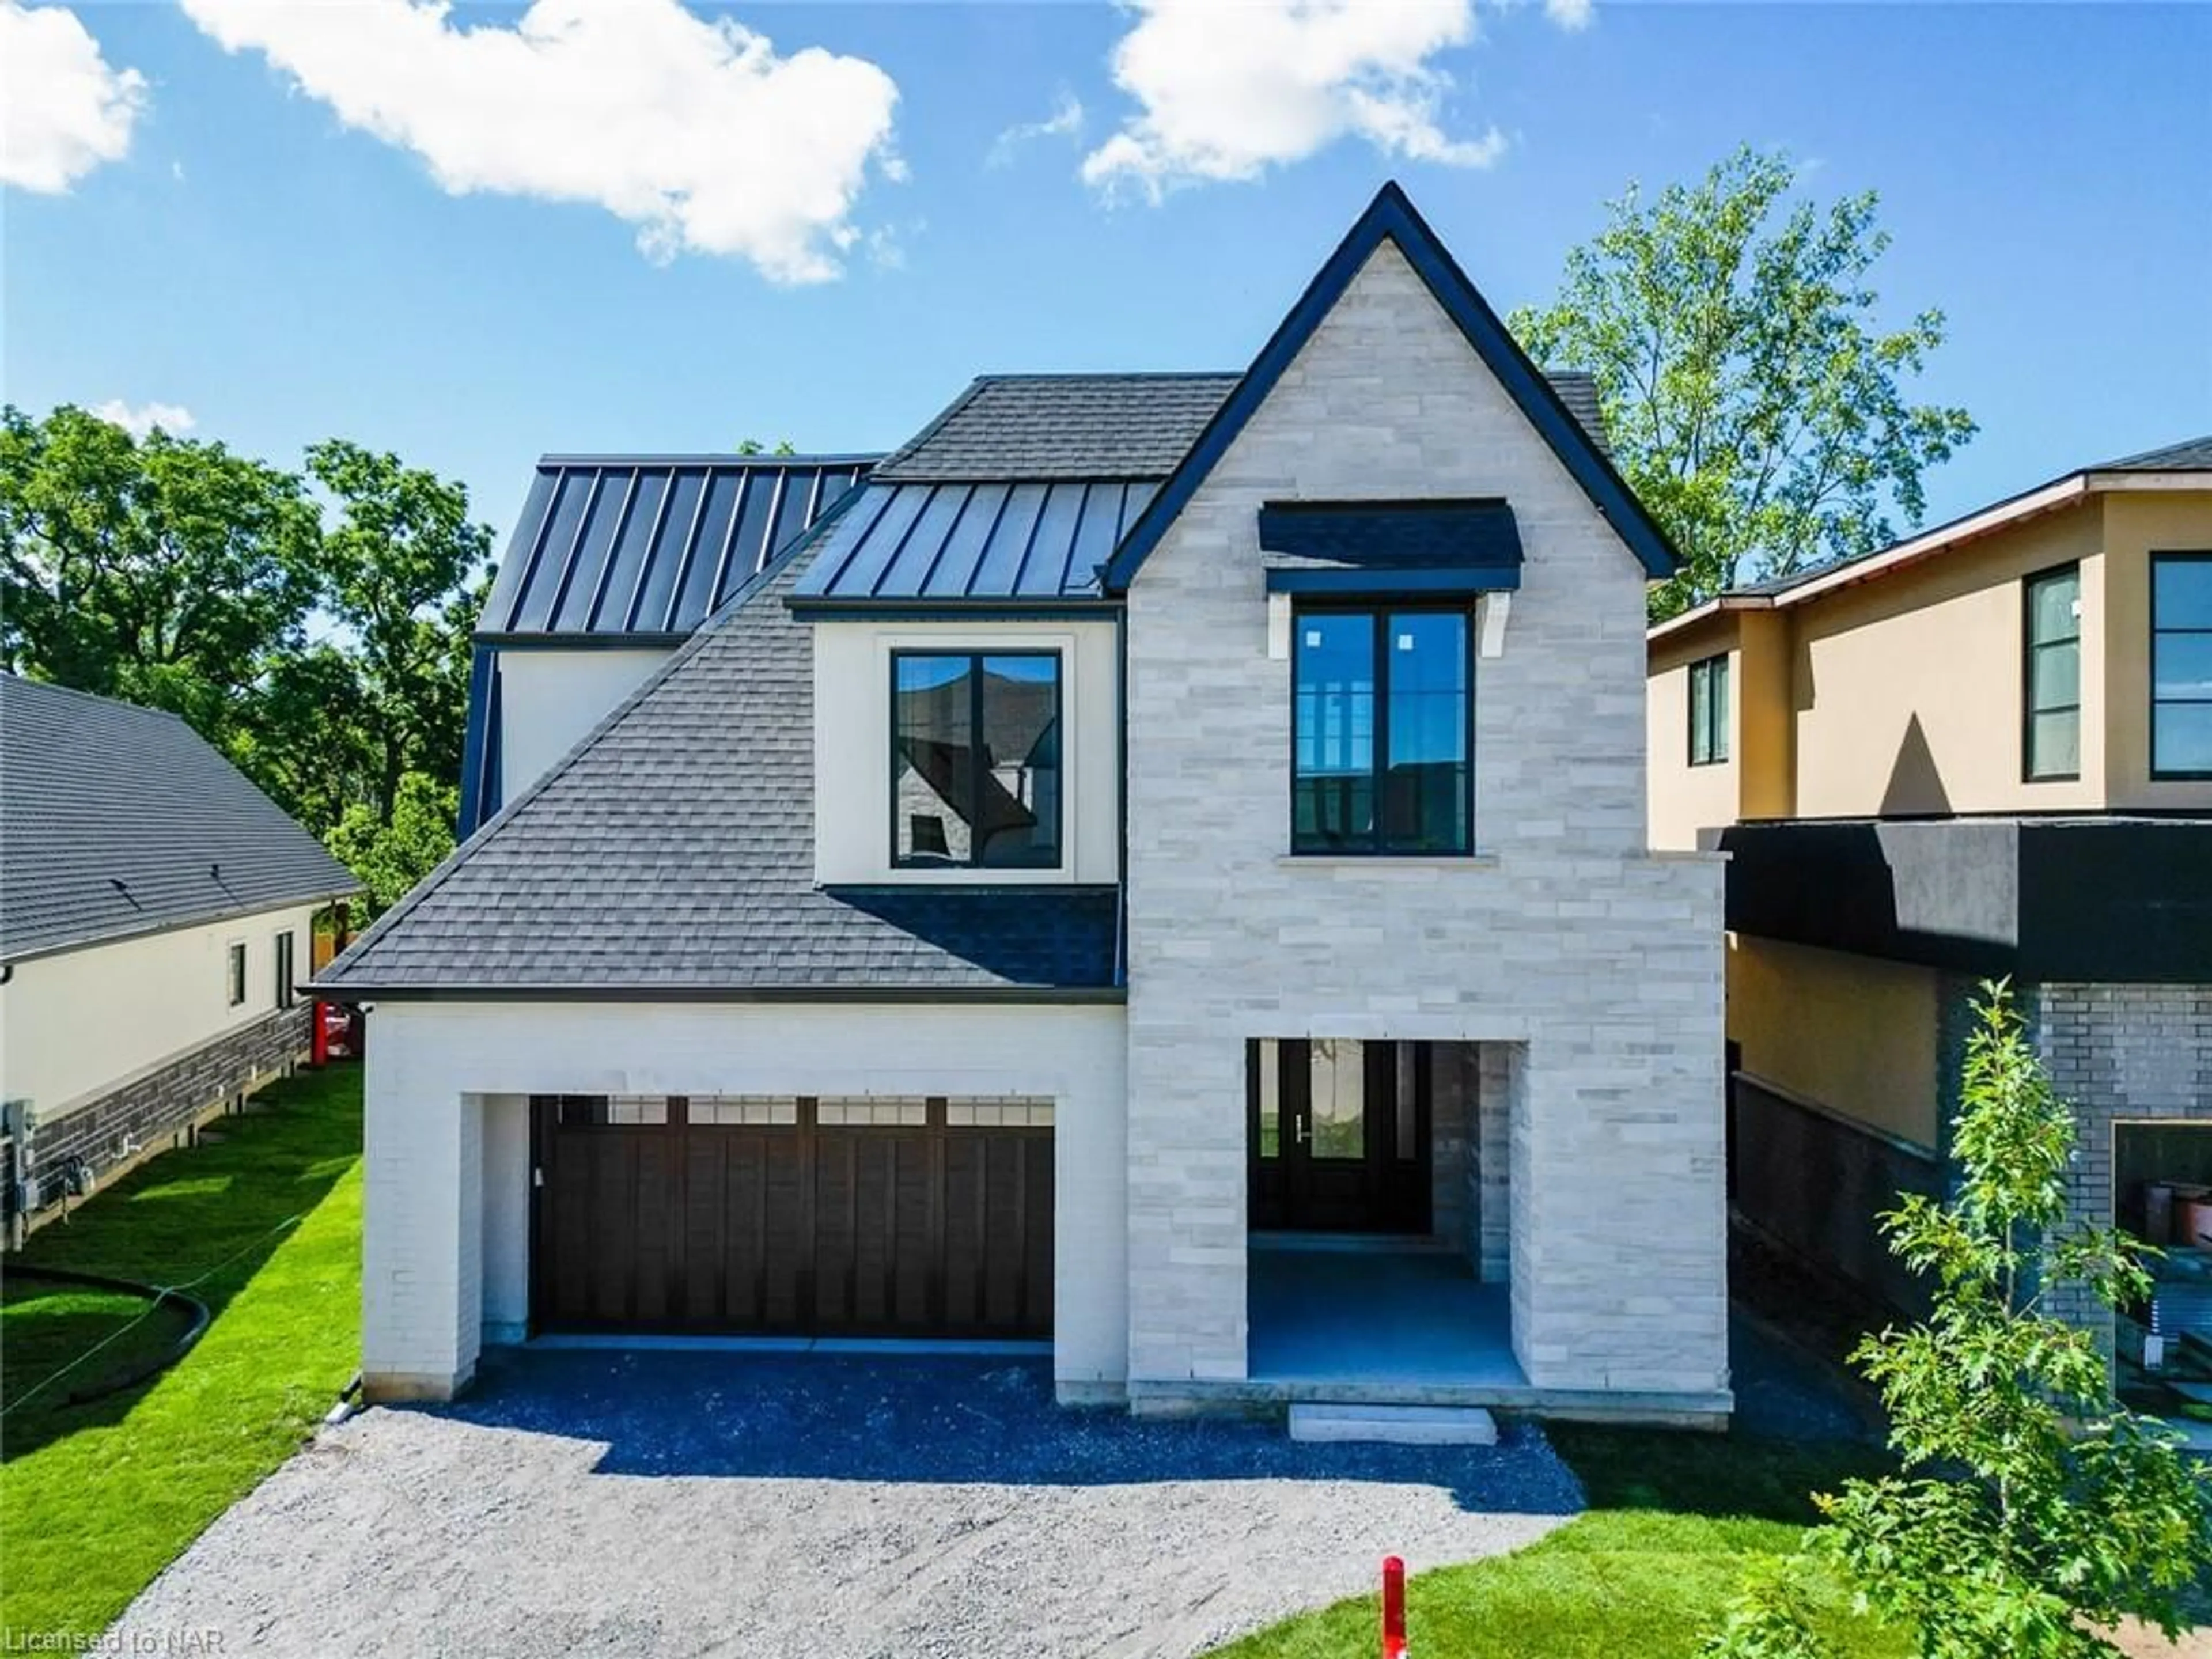 Home with brick exterior material for 94 Millpond Rd, Niagara-on-the-Lake Ontario L0S 1P0